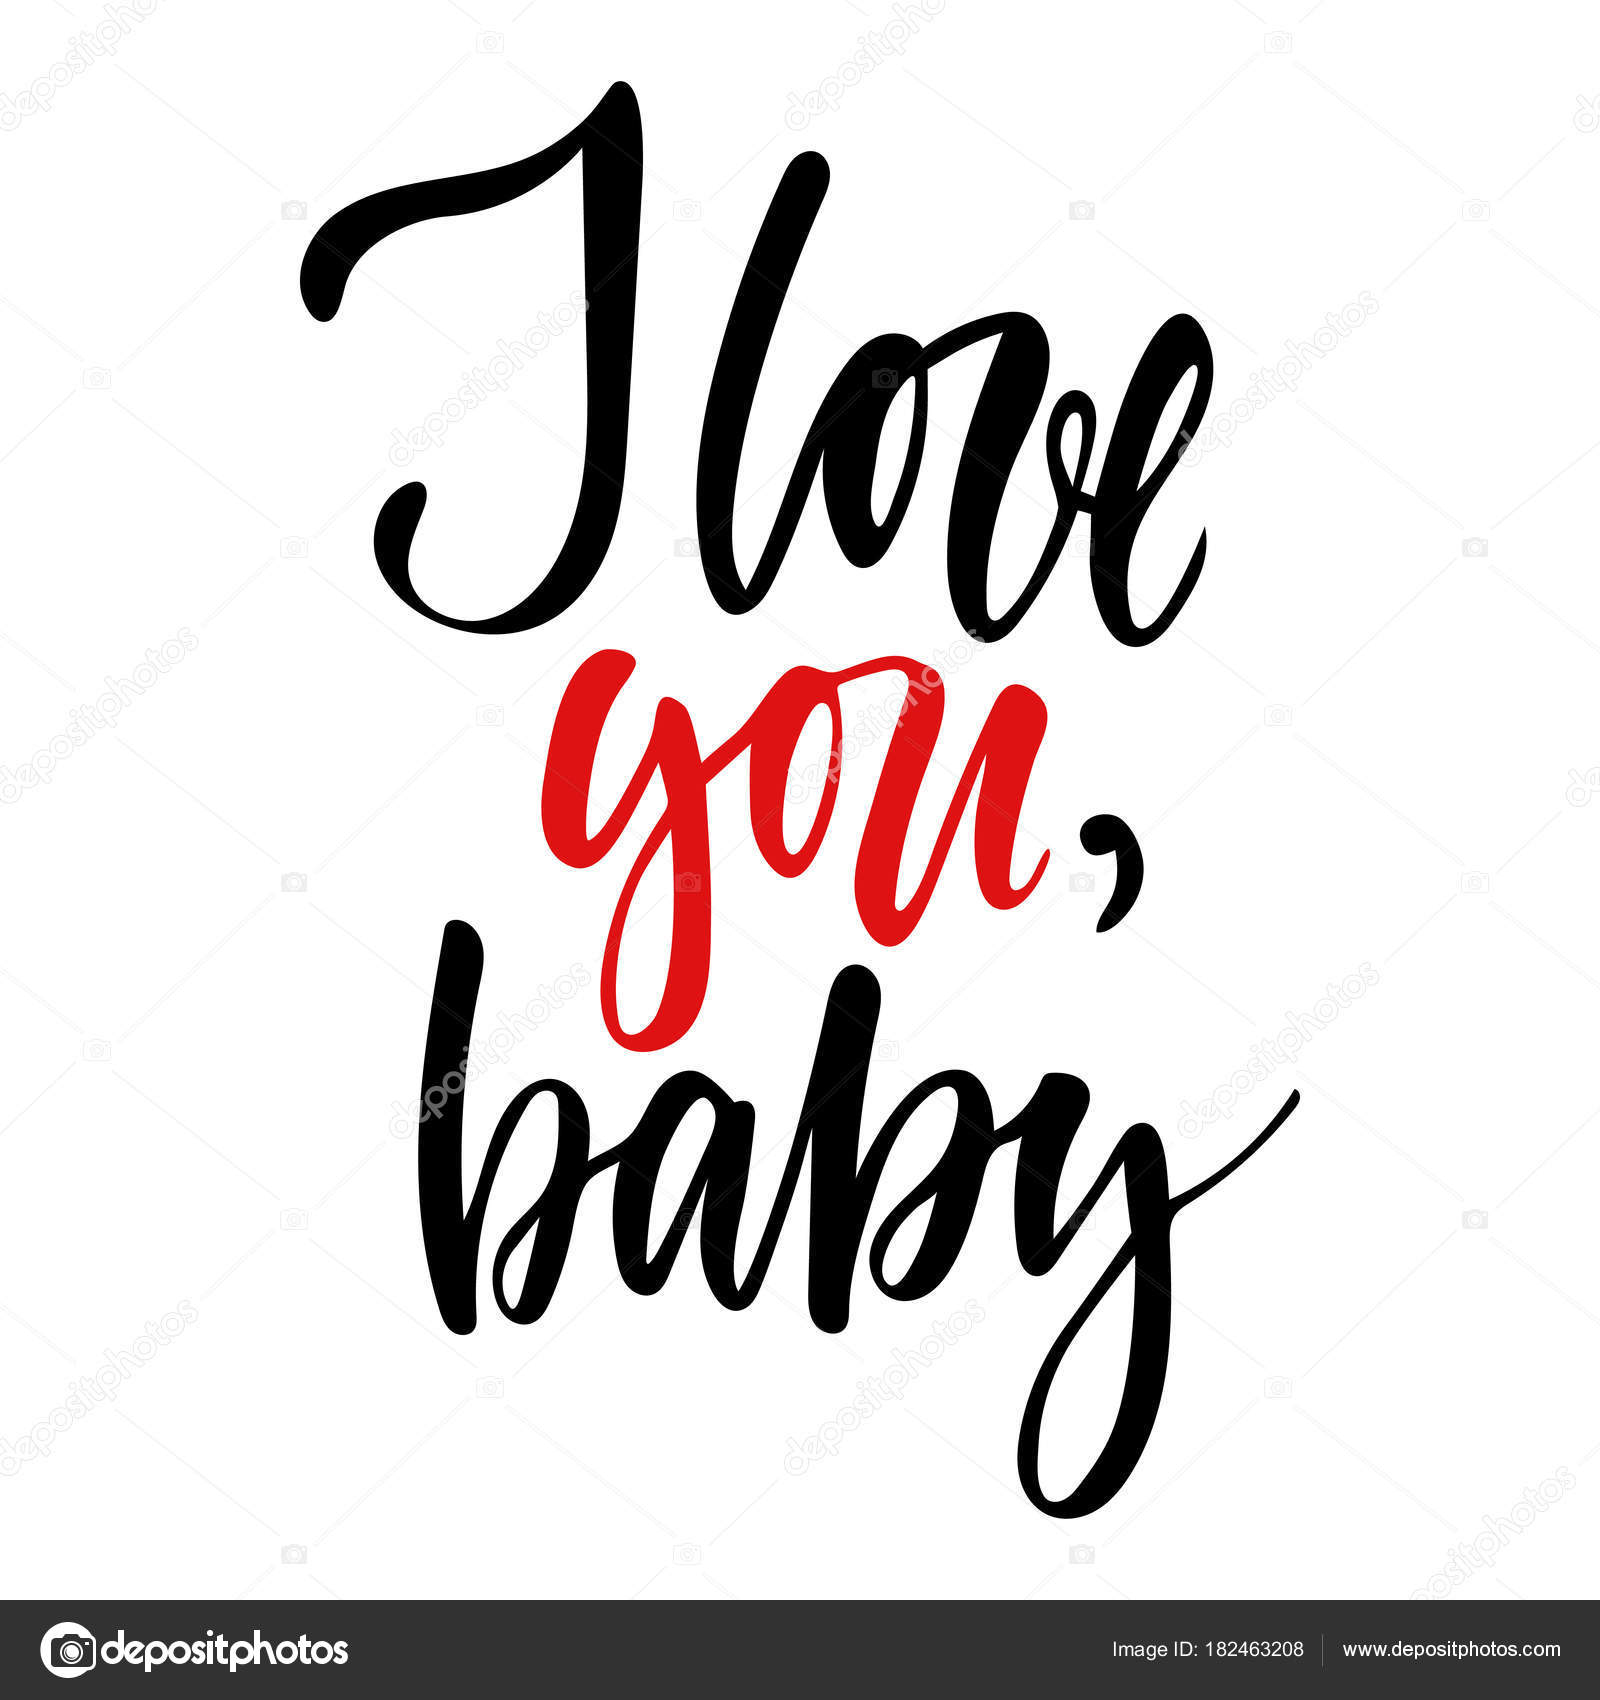 Vector Isolated Happy Valentines Day Illustration With Phrase I Love You Baby Hand Drawn Wedding Background Red And Black Calligraphy Hand Lettering For Card Print Typography Poster Invitation Vector Image By C